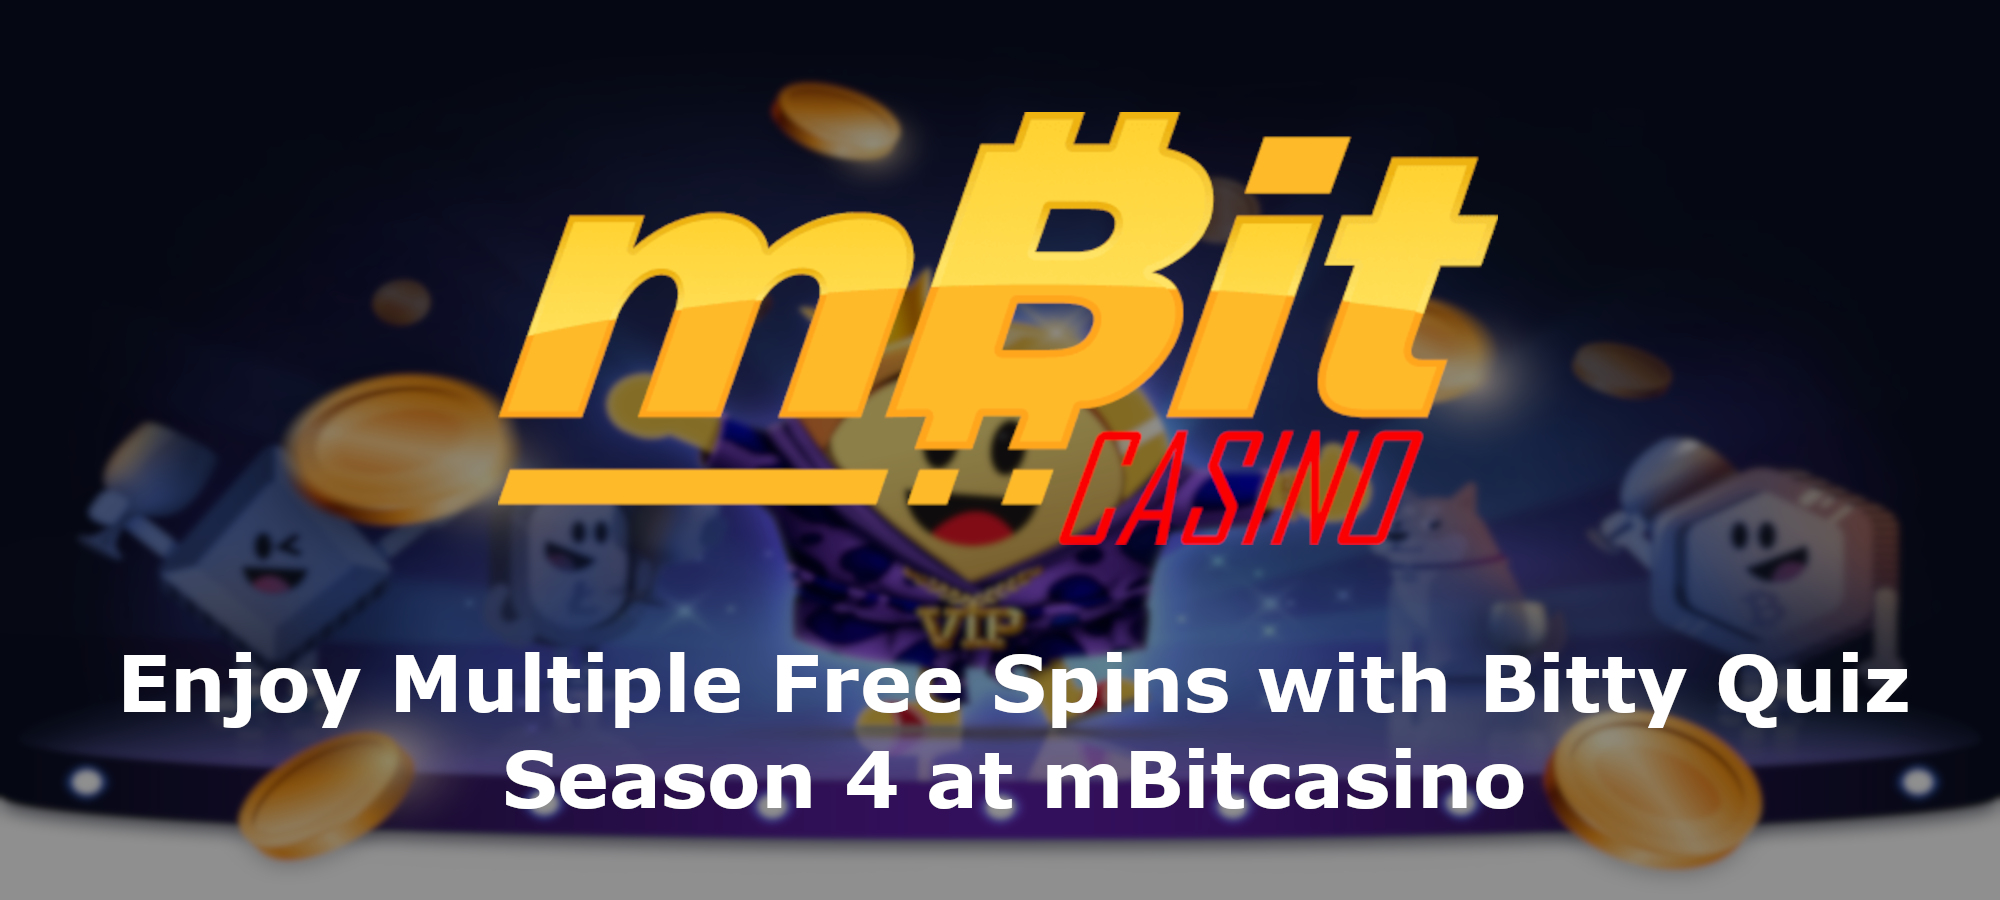 Enjoy Multiple Free Spins with Bitty Quiz Season 4 at mBitcasino